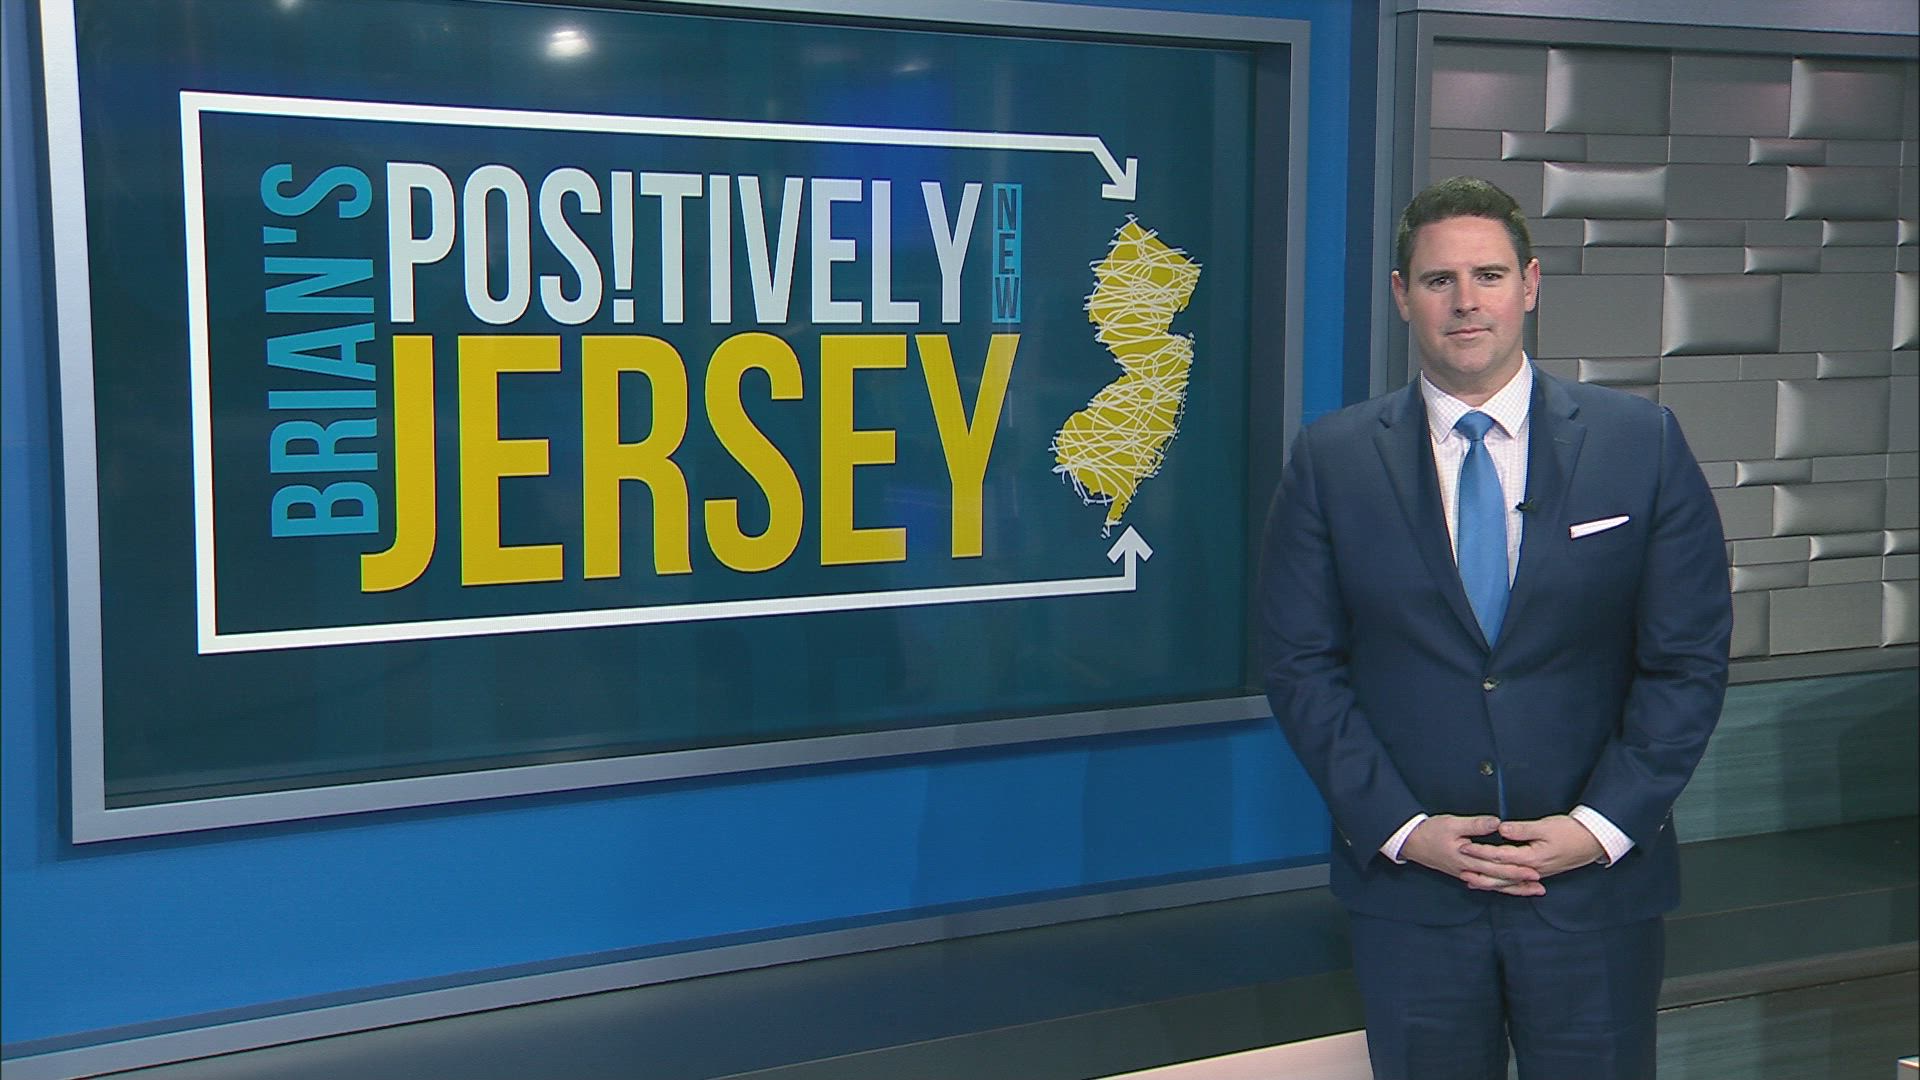 Positively New Jersey: 2022 was a year to remember in the Garden State